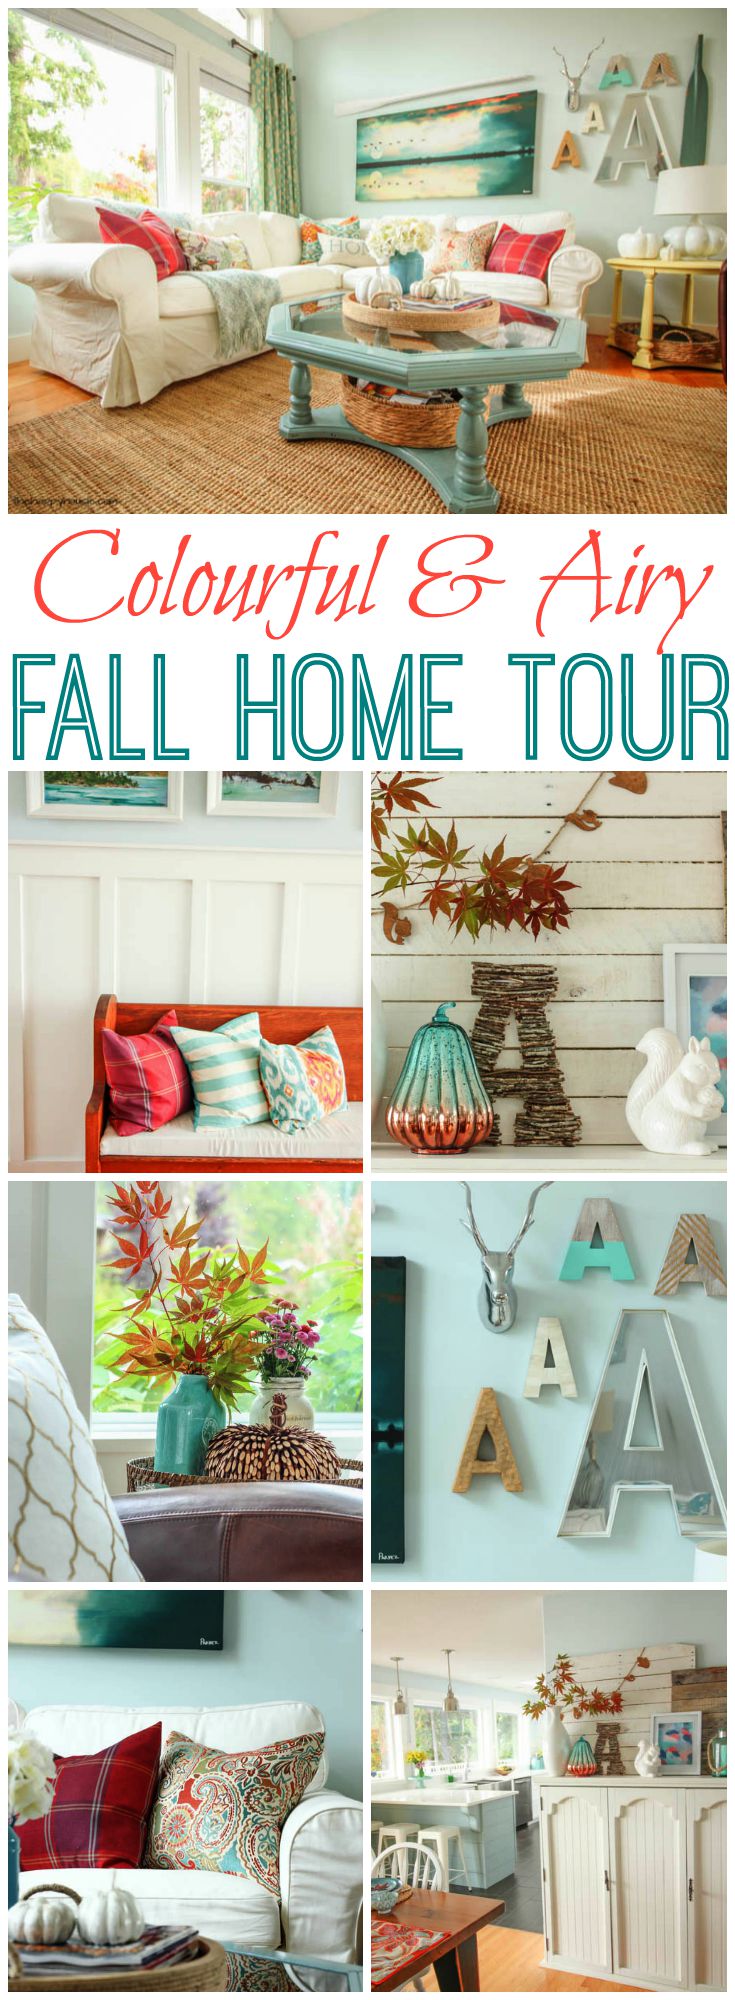 I love this fresh and colourful fall home tour at thehappyhousie.com poster.